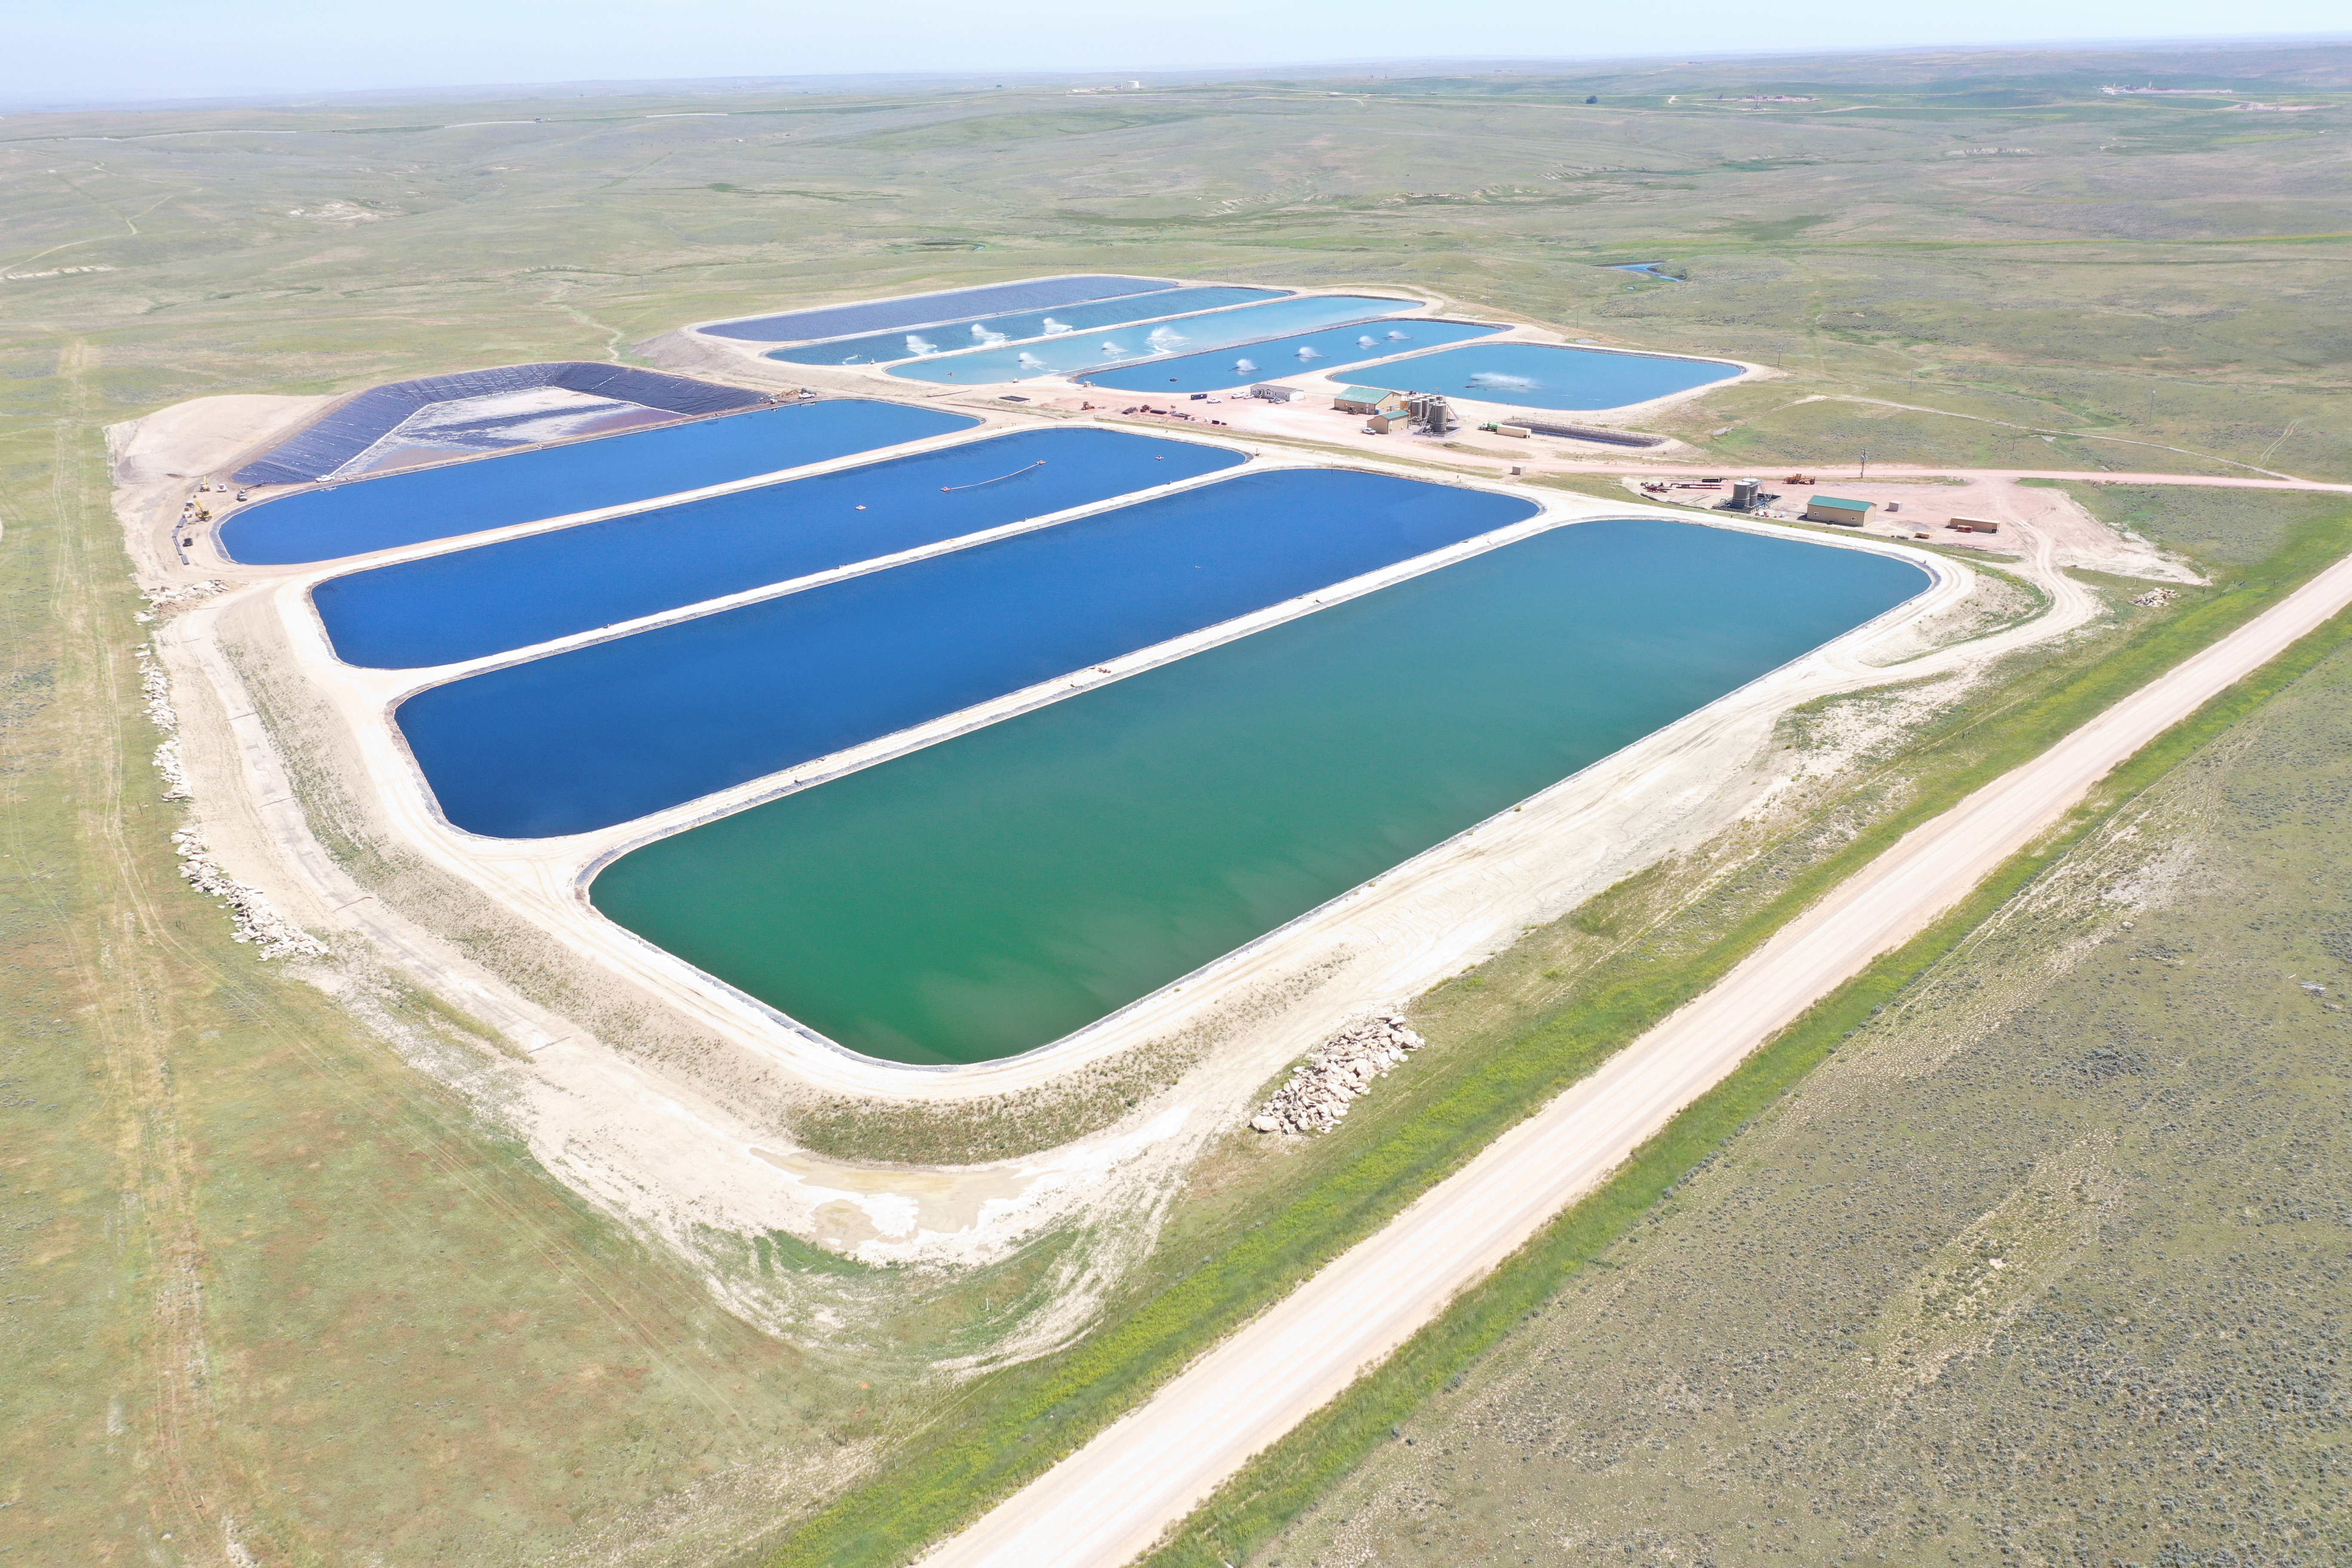 BNN’s Clarkelen water recycling and disposal facility in the Powder River Basin.